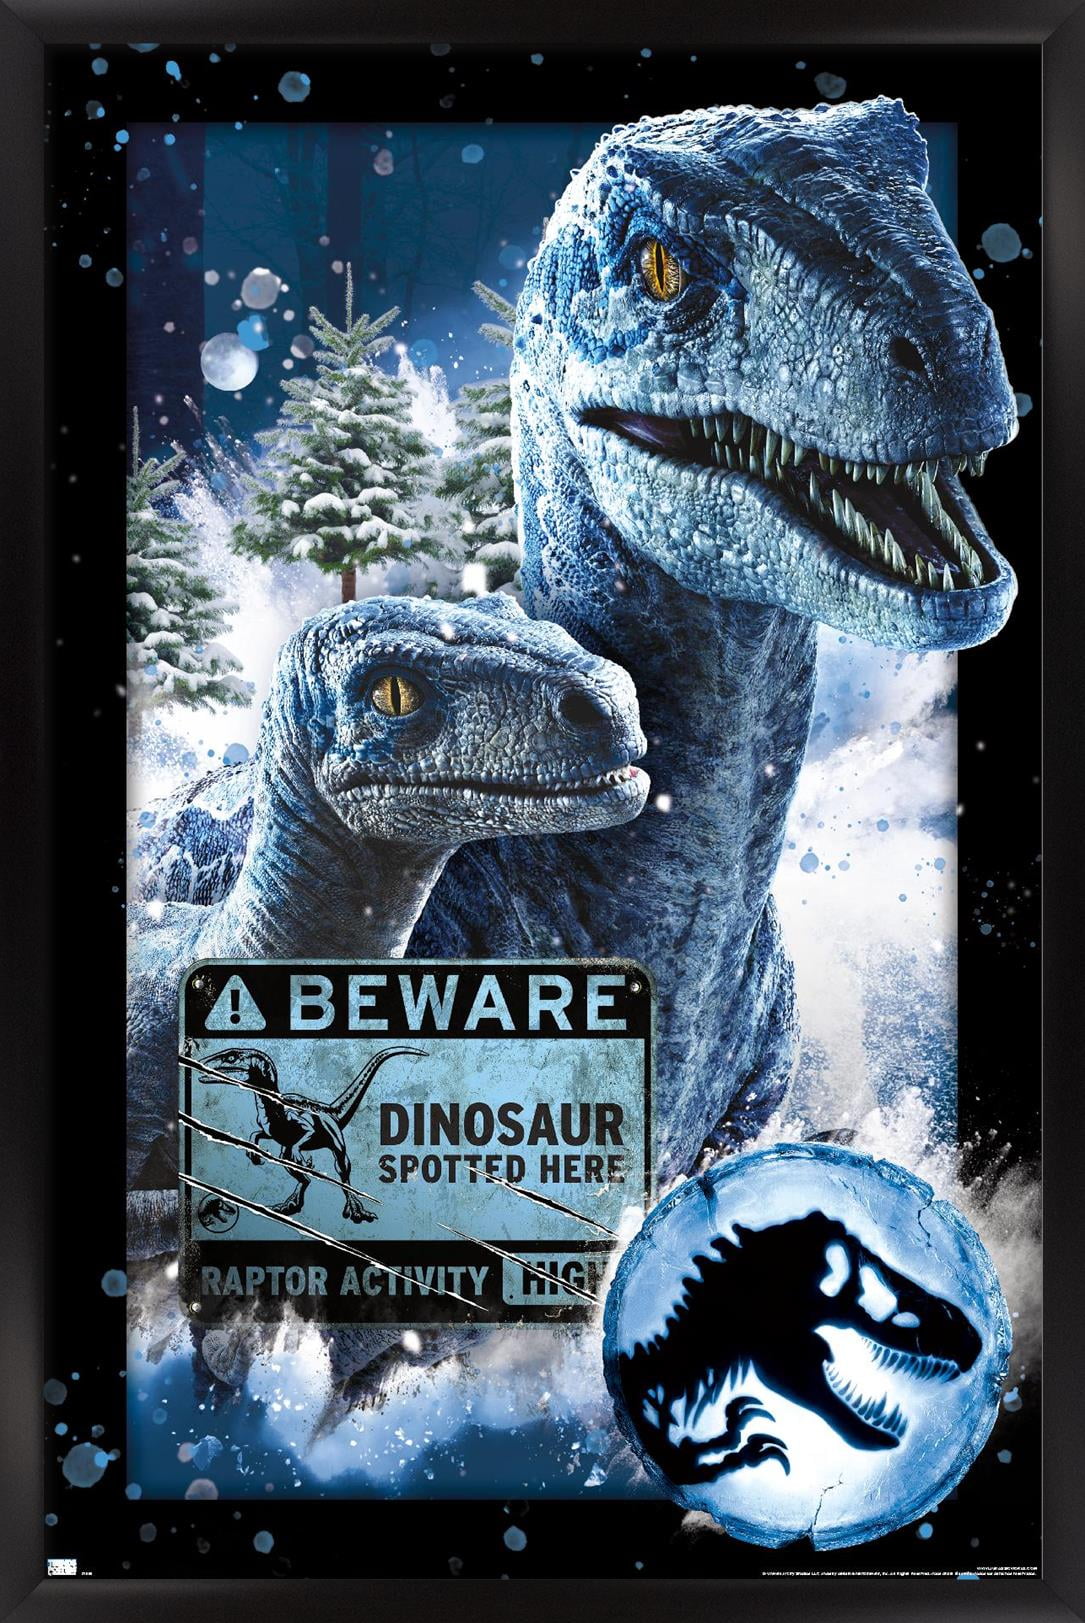 Jurassic World: Dominion - Dinosaur Spotted Here Wall Poster, 22.375 x 34